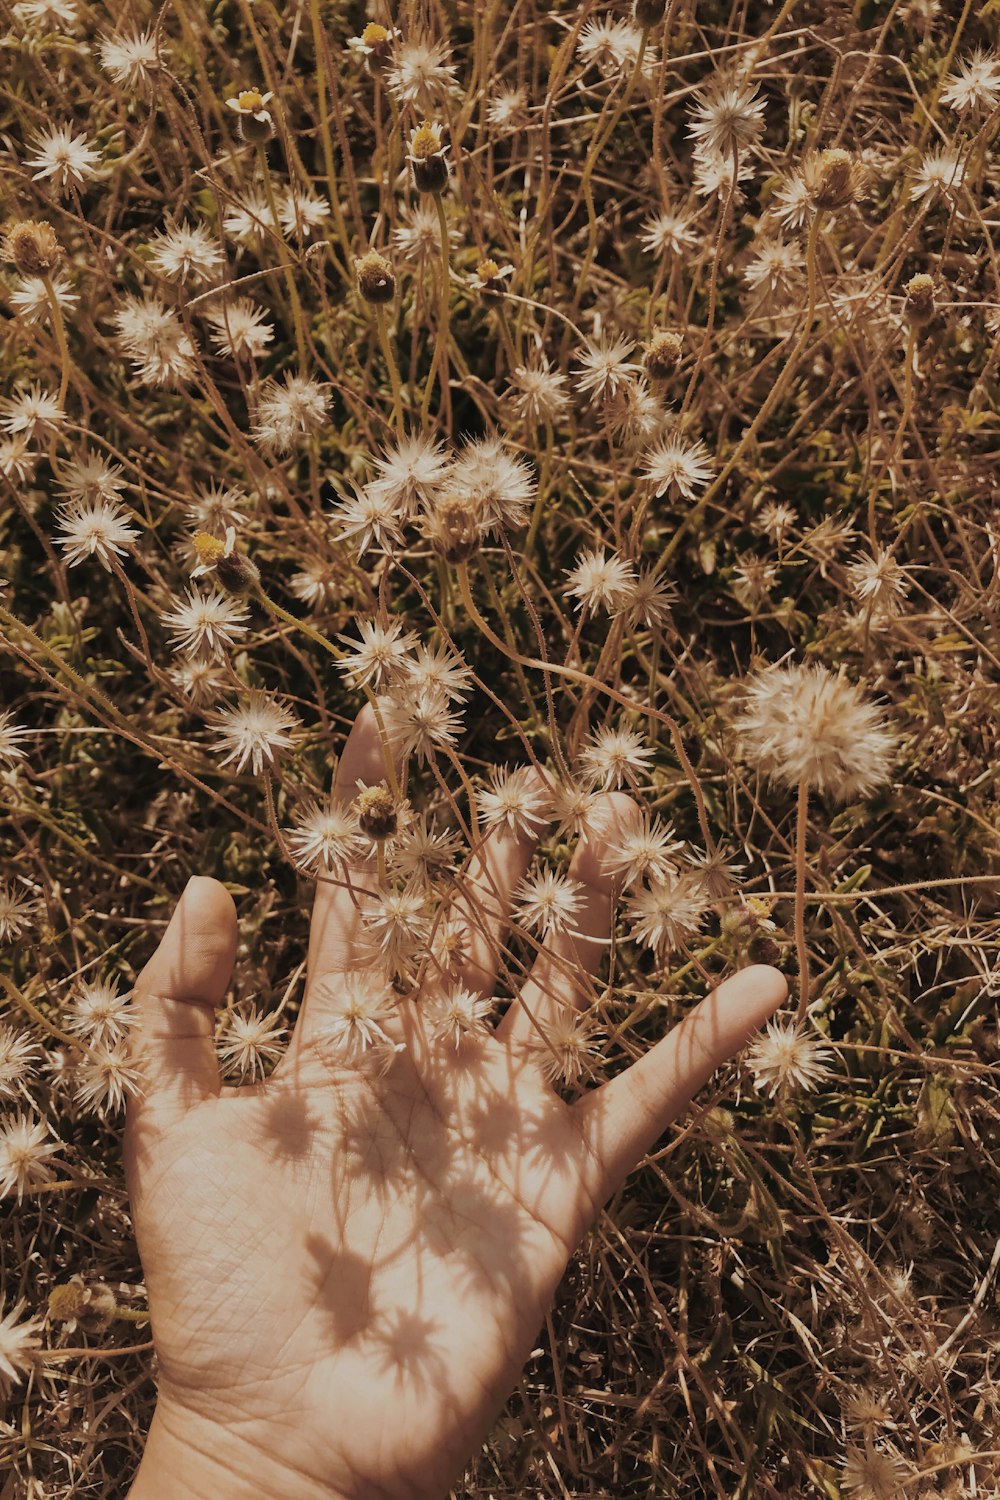 a person's hand reaching for a flower